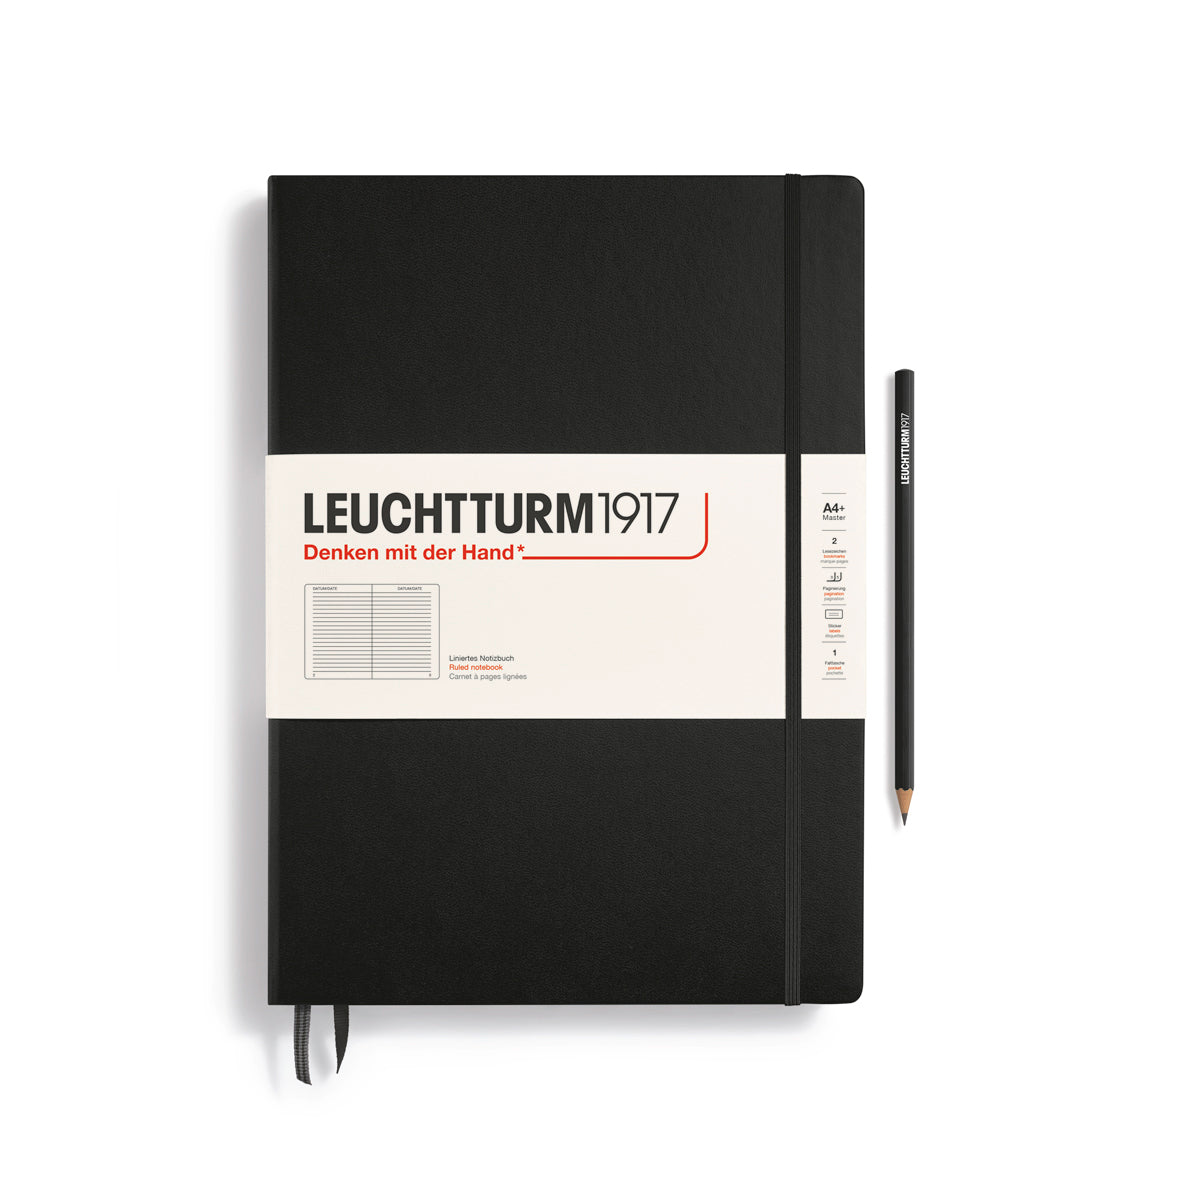 Master A4+ Ruled Hardcover Notebook